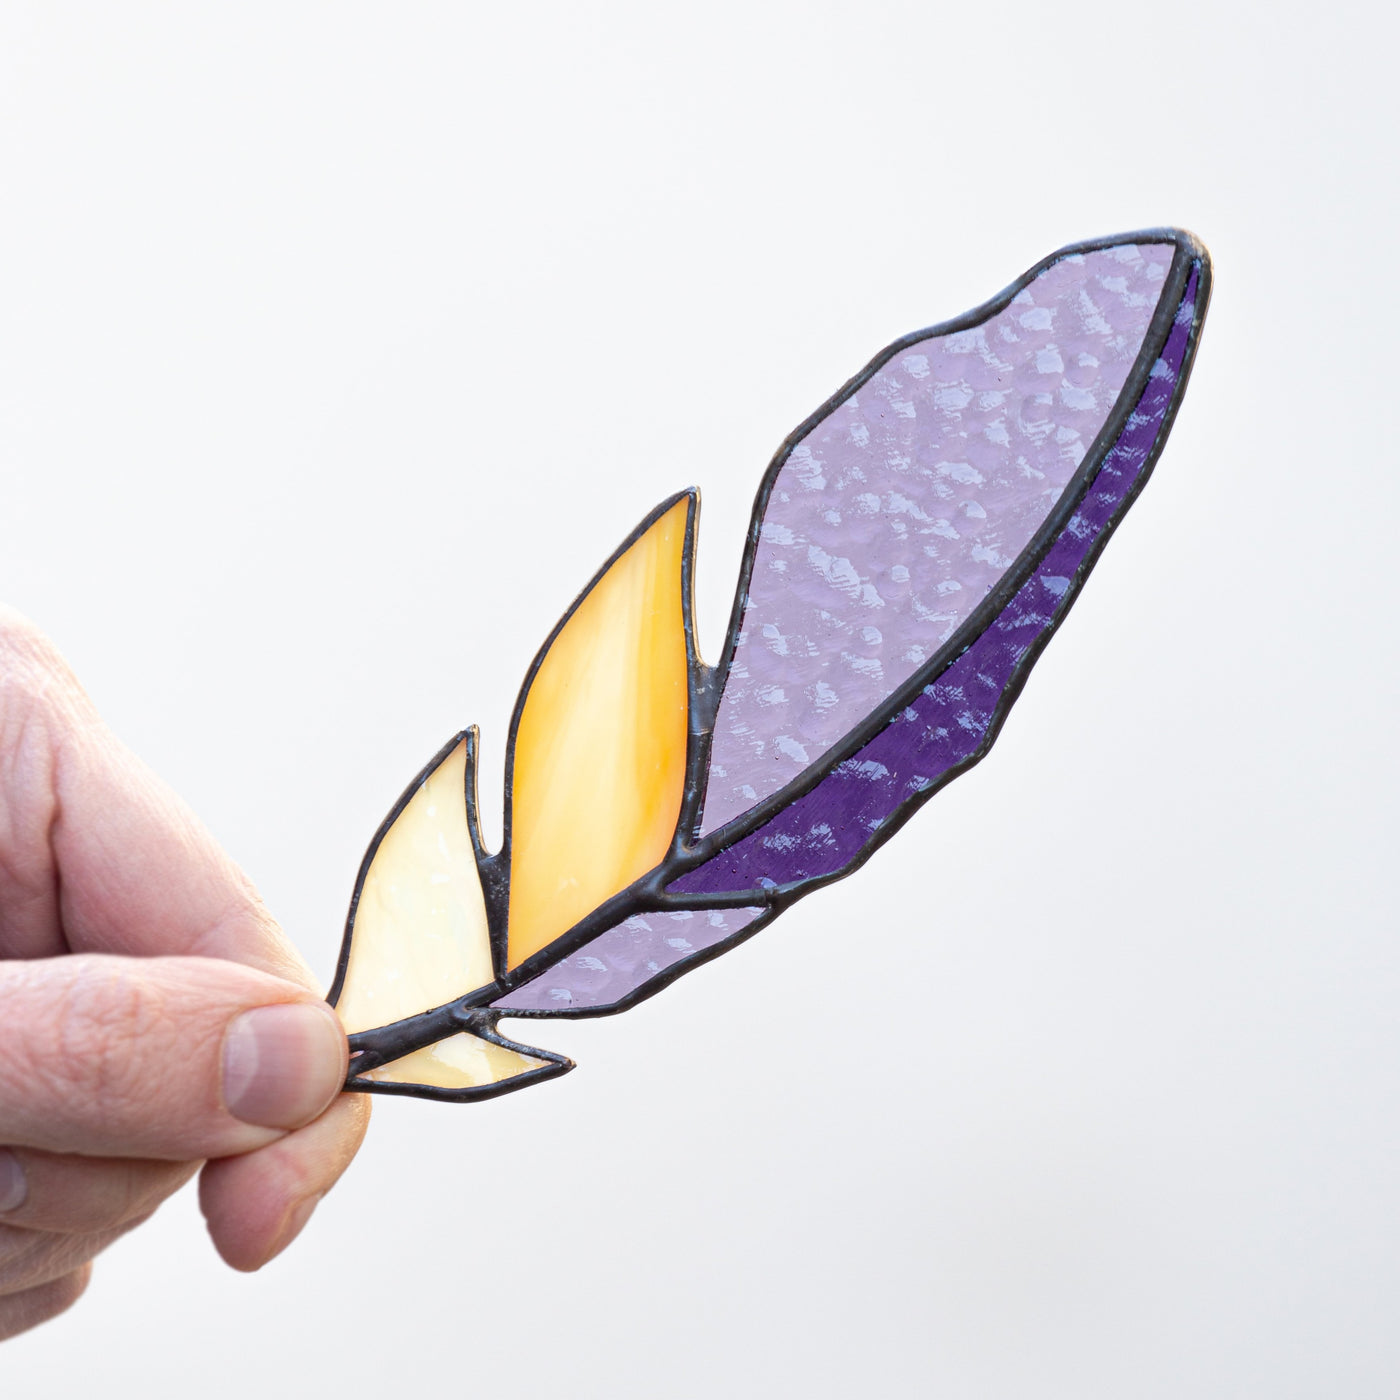 Stained glass feather suncatcher with purple and yellow accents